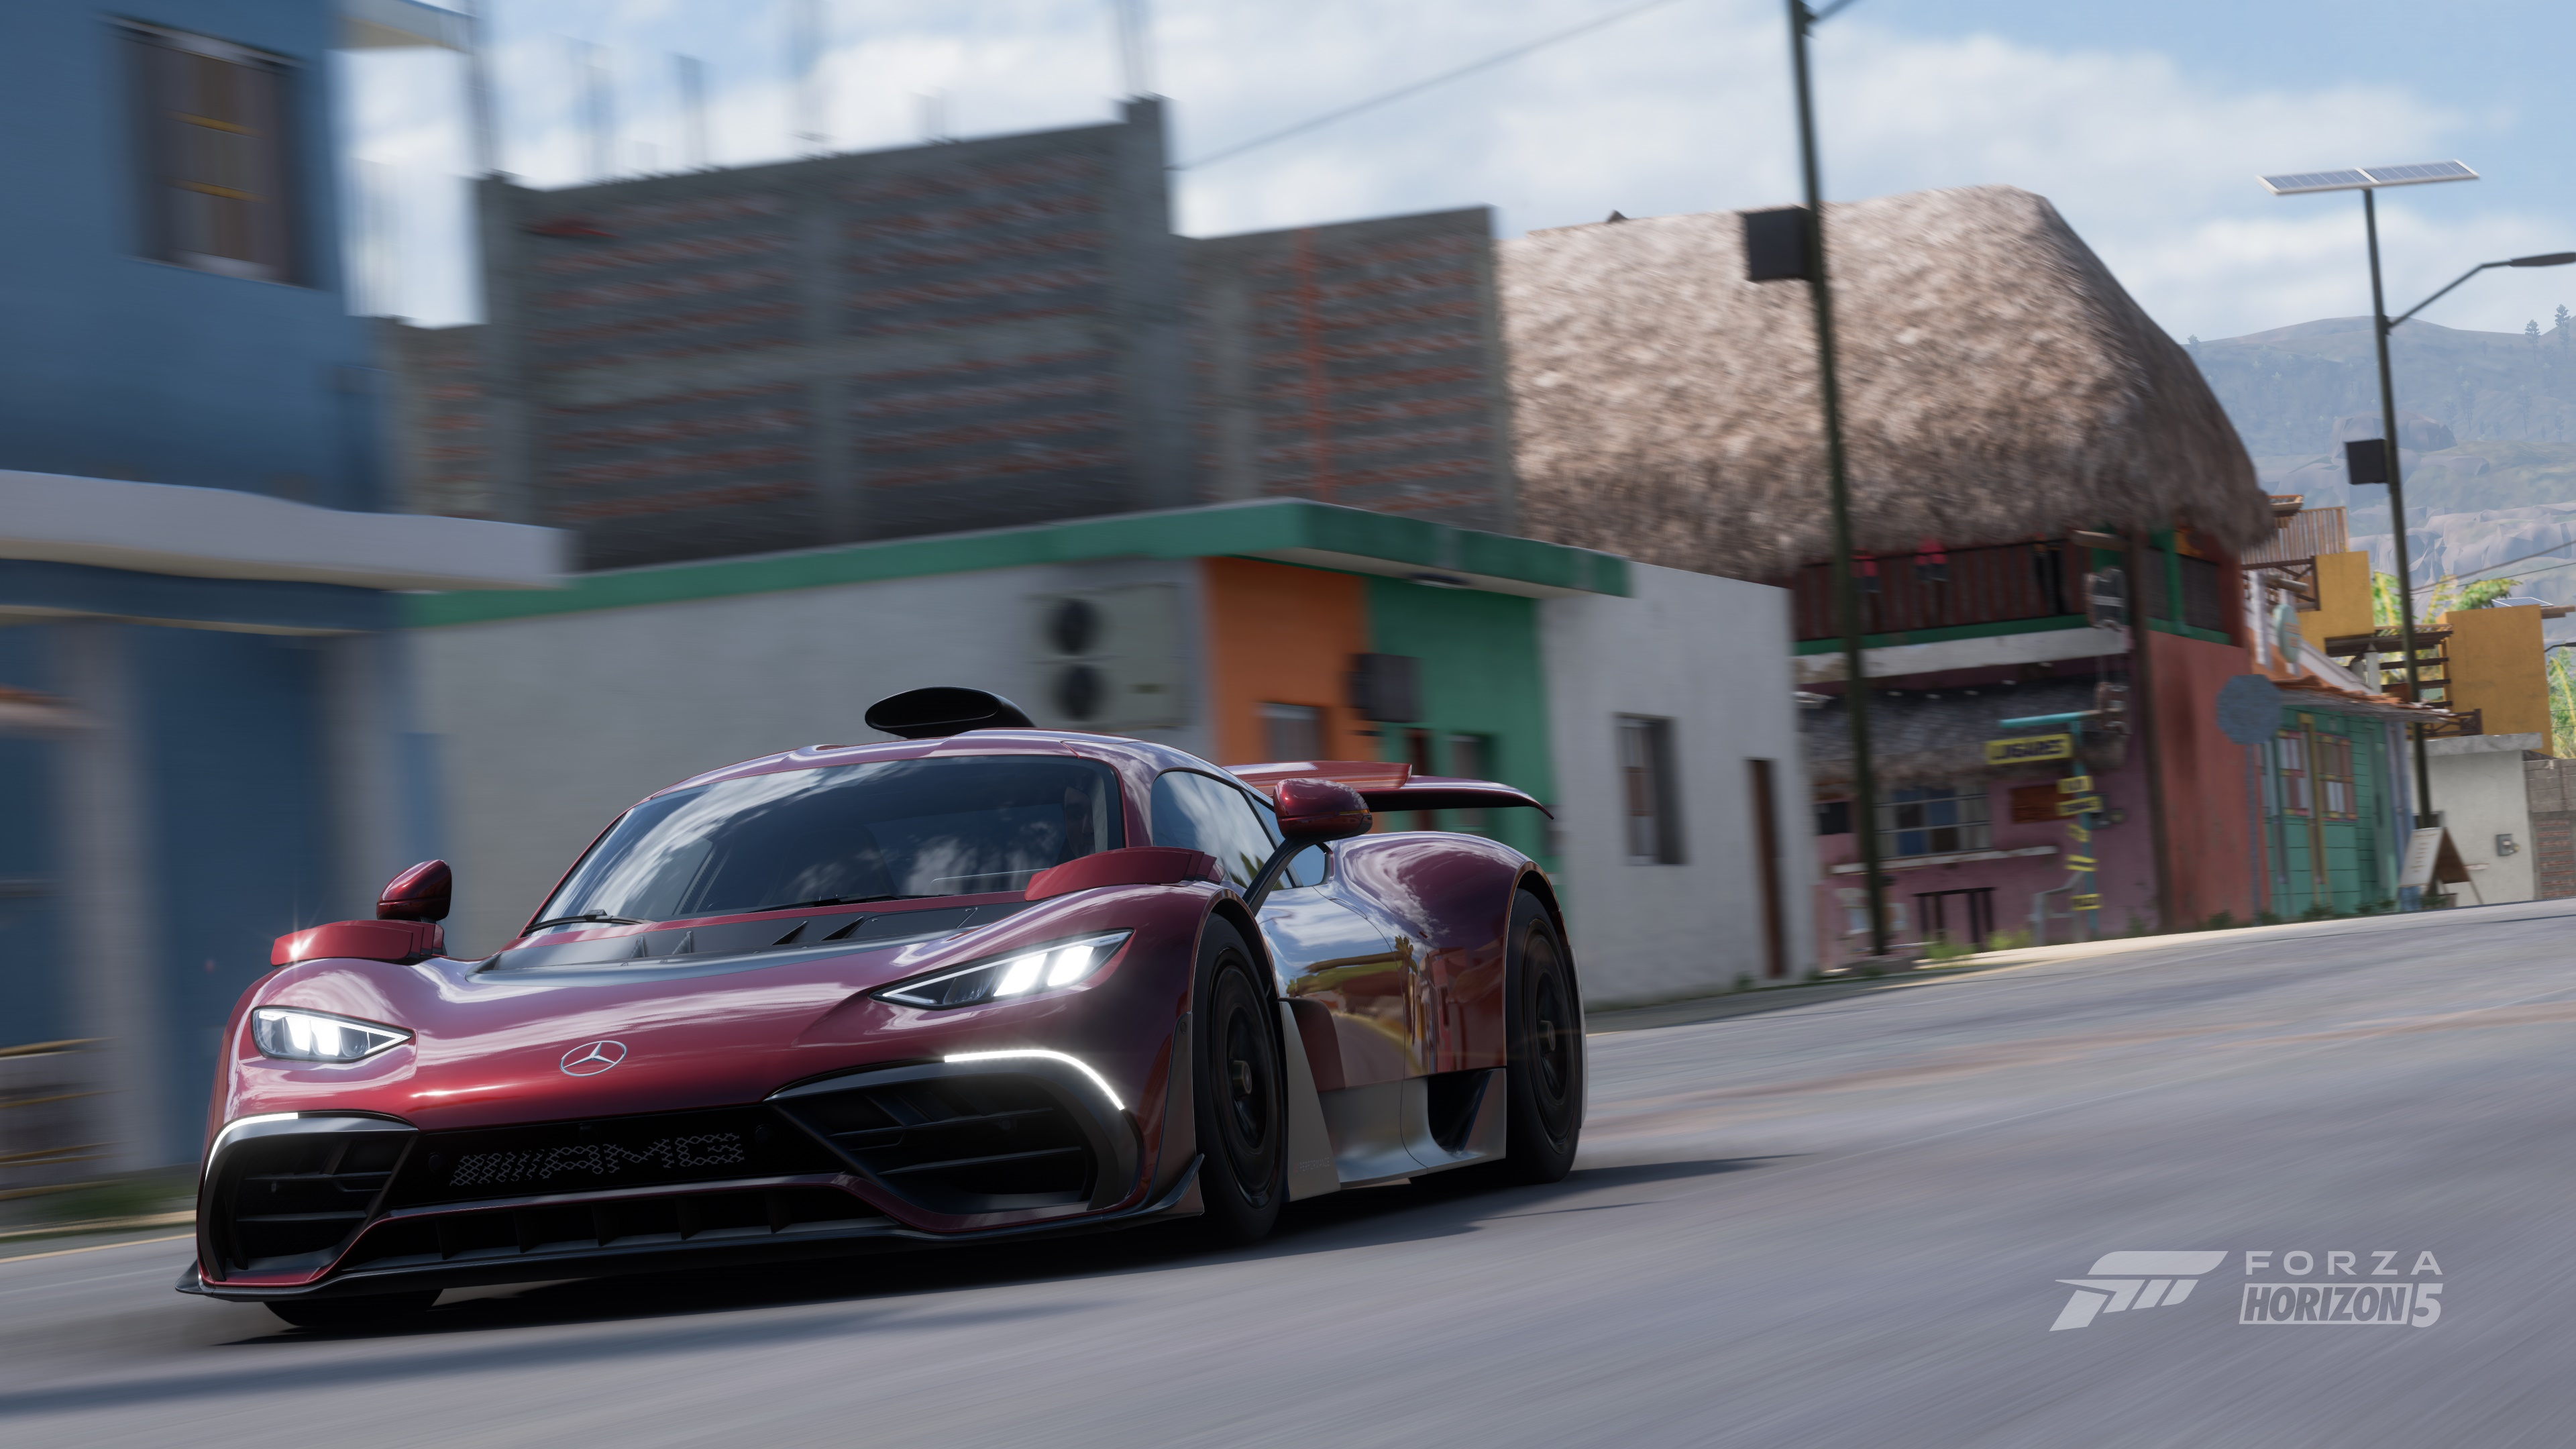 Forza Horizon 5 review: one of the best games of 2021